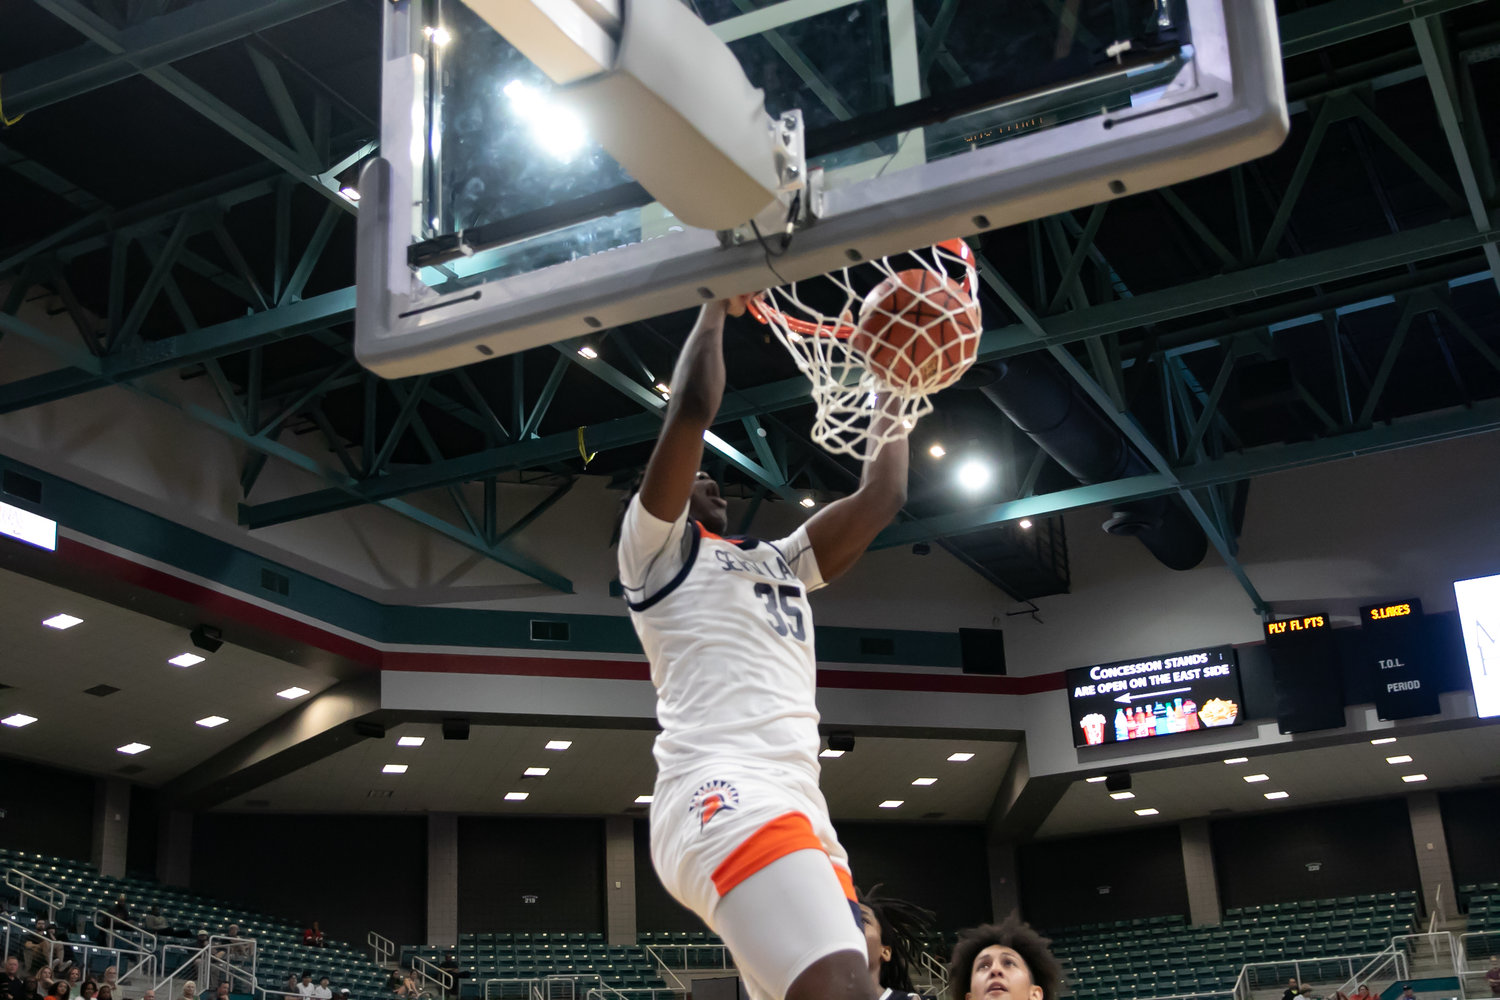 Josh Akpovwa throws down a dunk during Monday's Class 6A Regional Quarterfinal between Seven Lakes and Stratford at the Merrell Center.